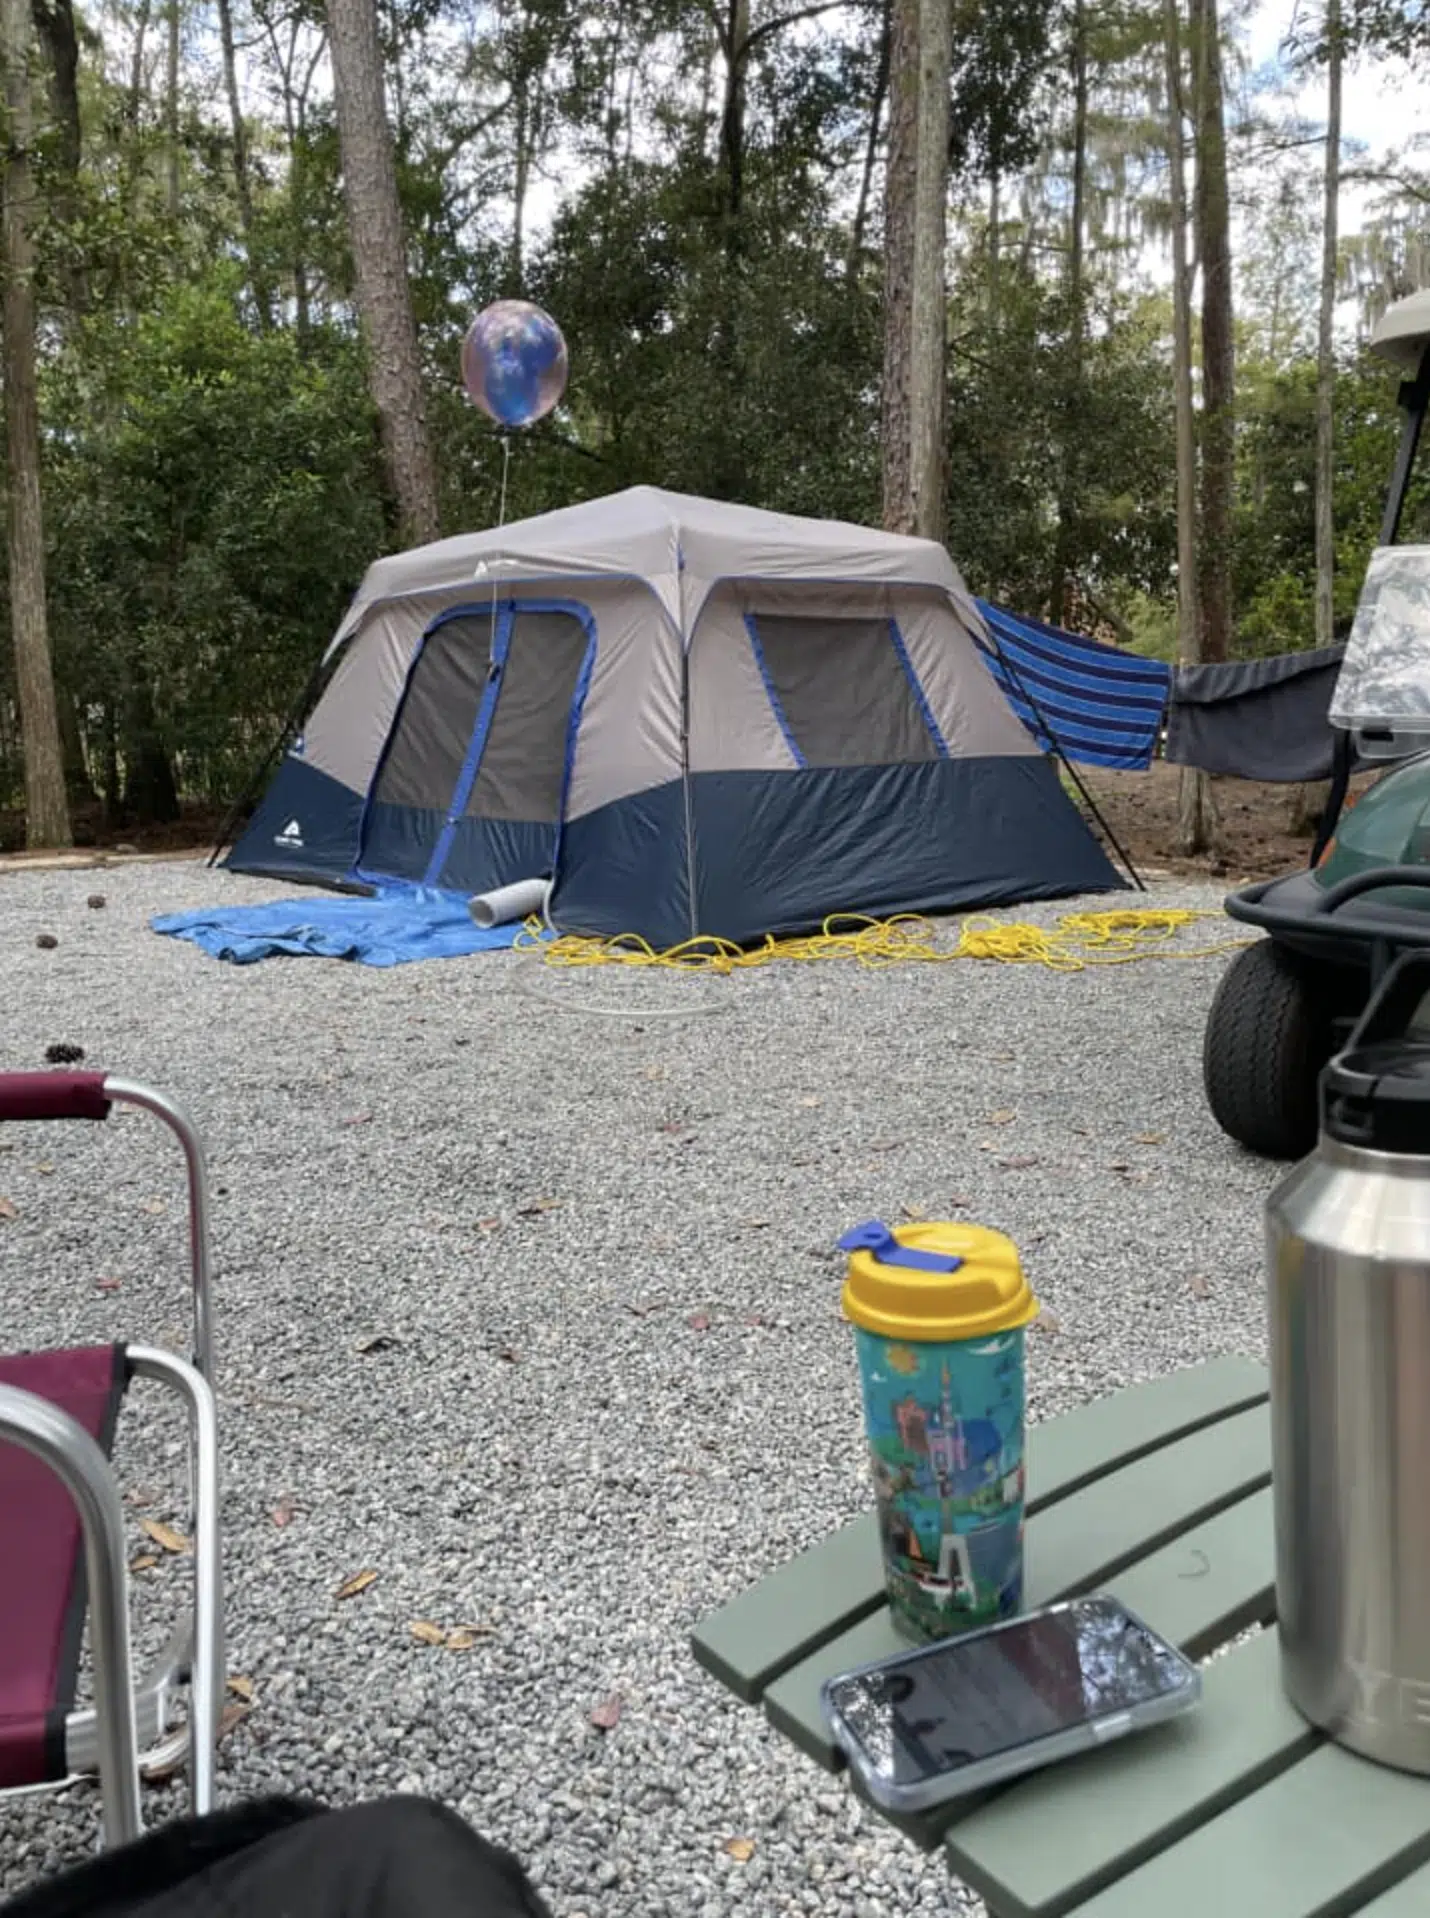 rental tent in a disney campsite at fort wilderness campground